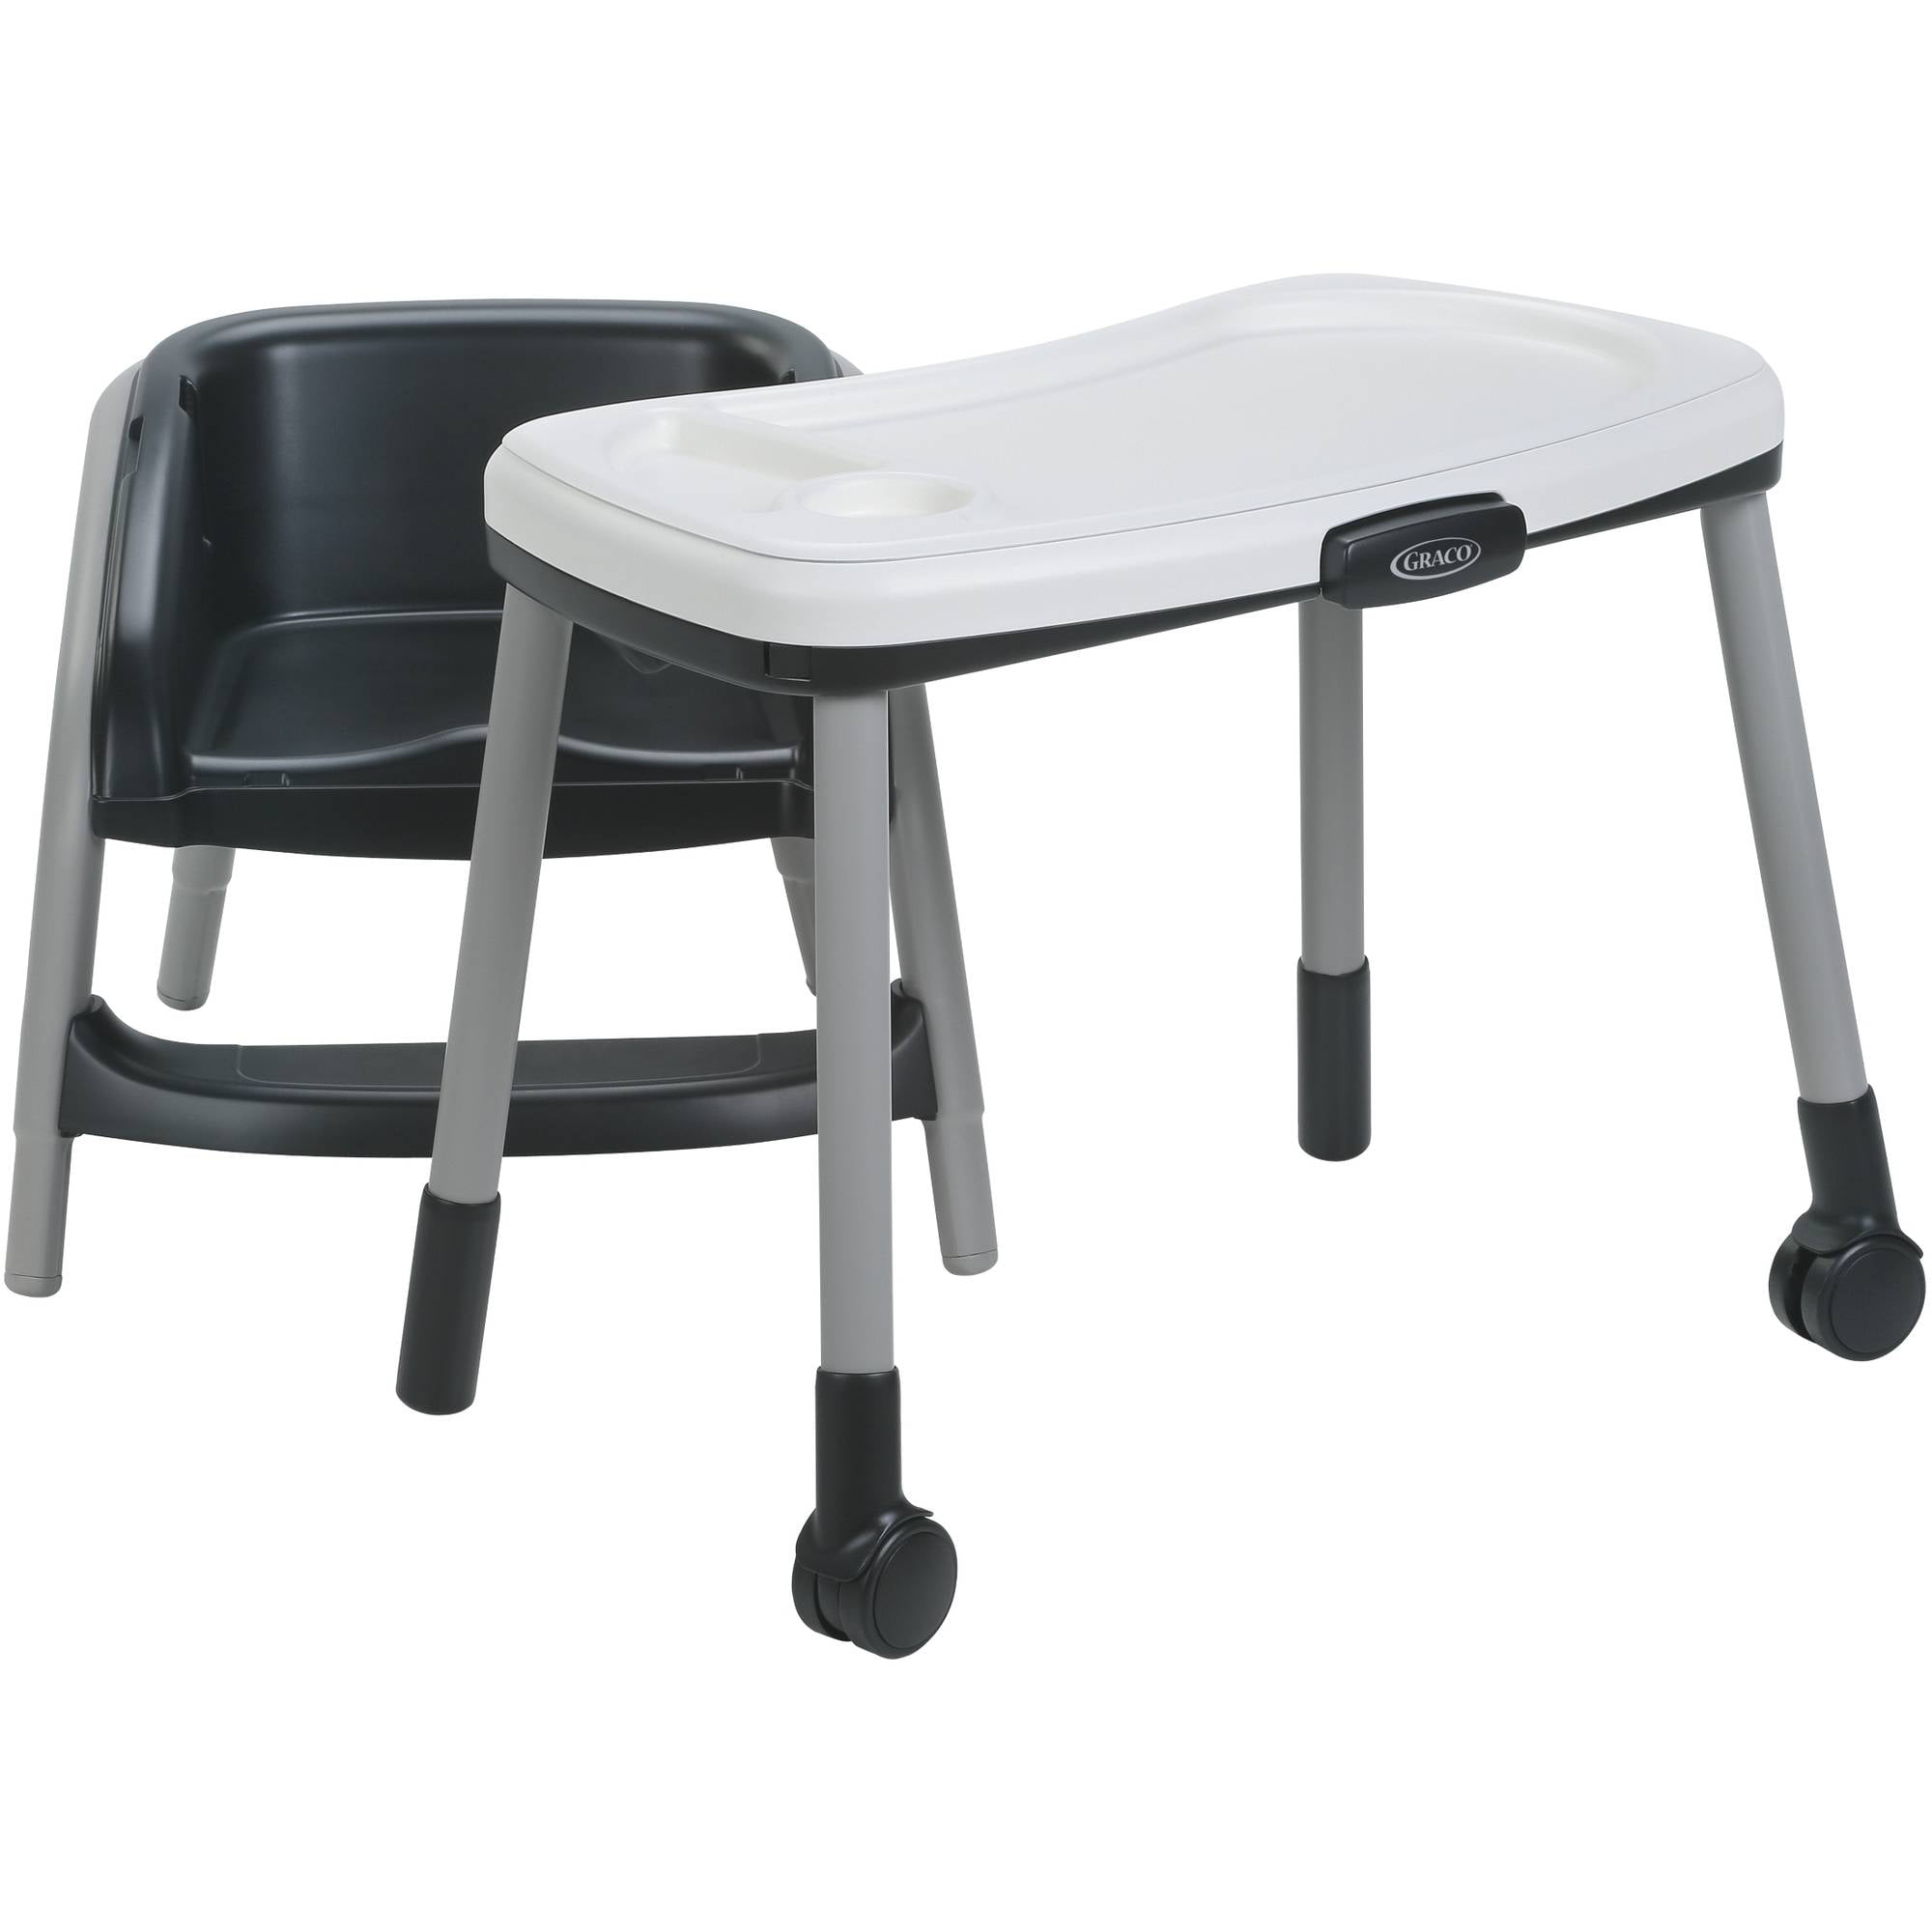 high chair that turns into table and chair